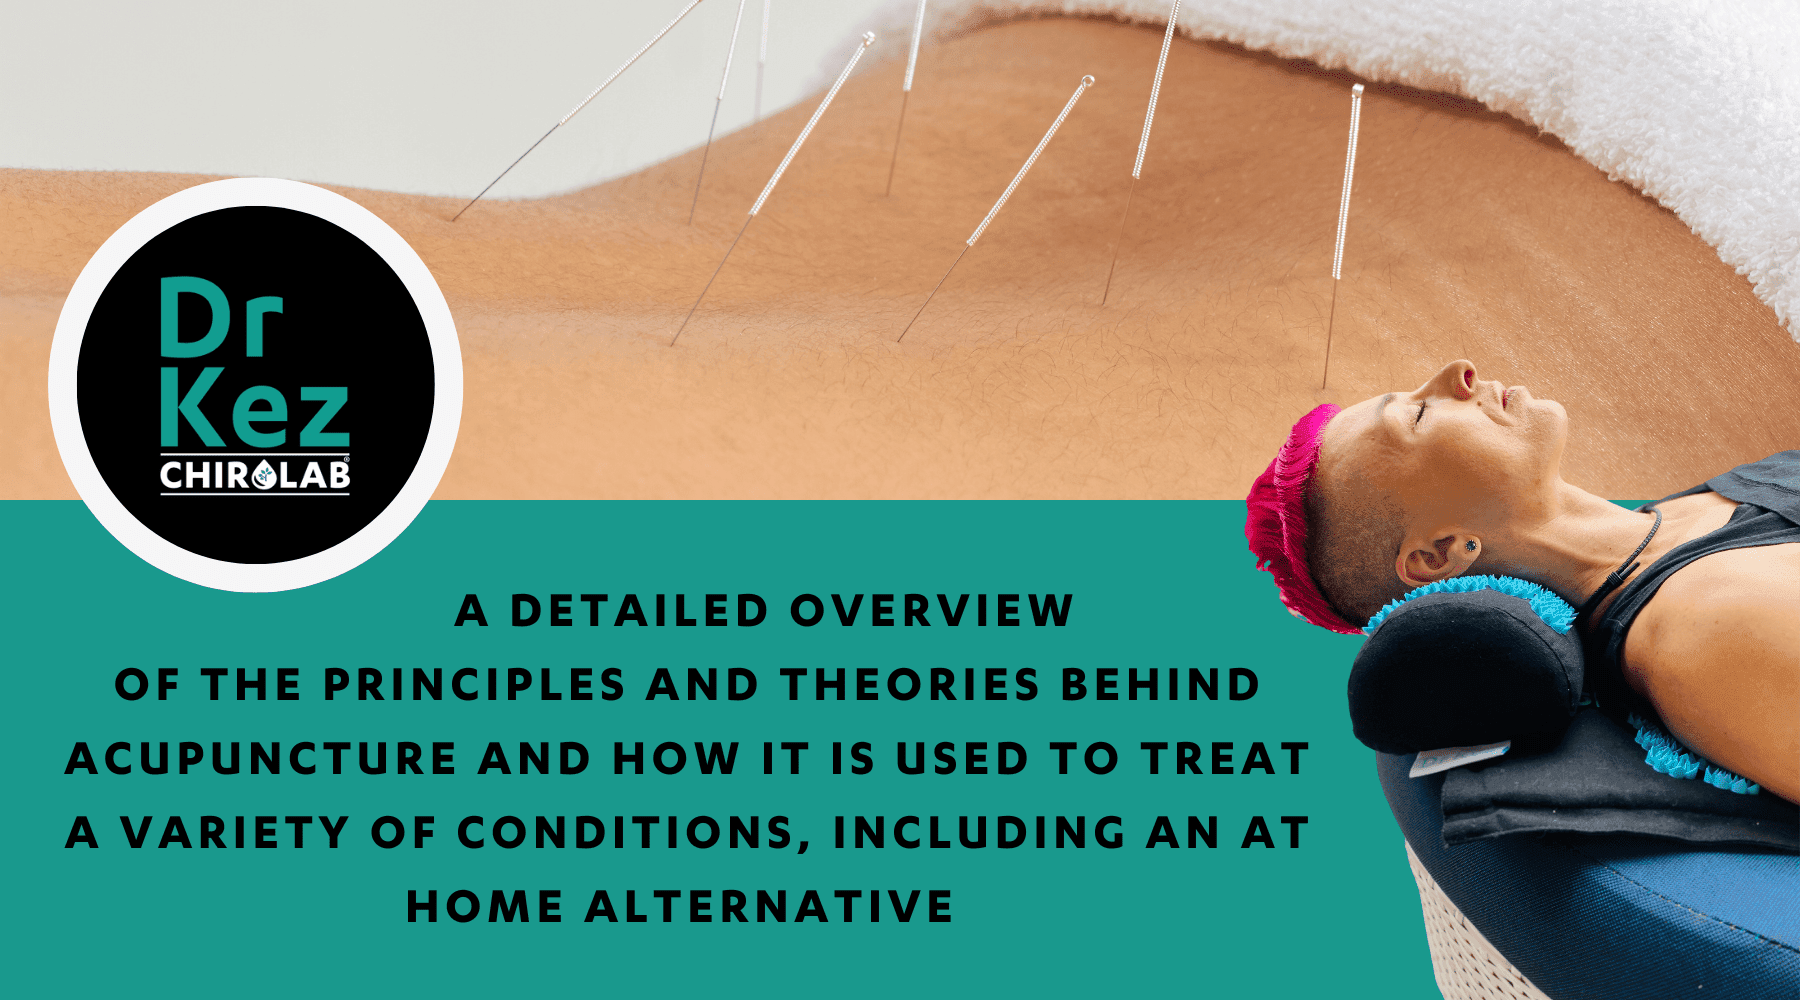 A detailed overview of the principles and theories behind acupuncture and how it is used to treat a variety of conditions, including an at home alternative - Dr Kez Chirolab 